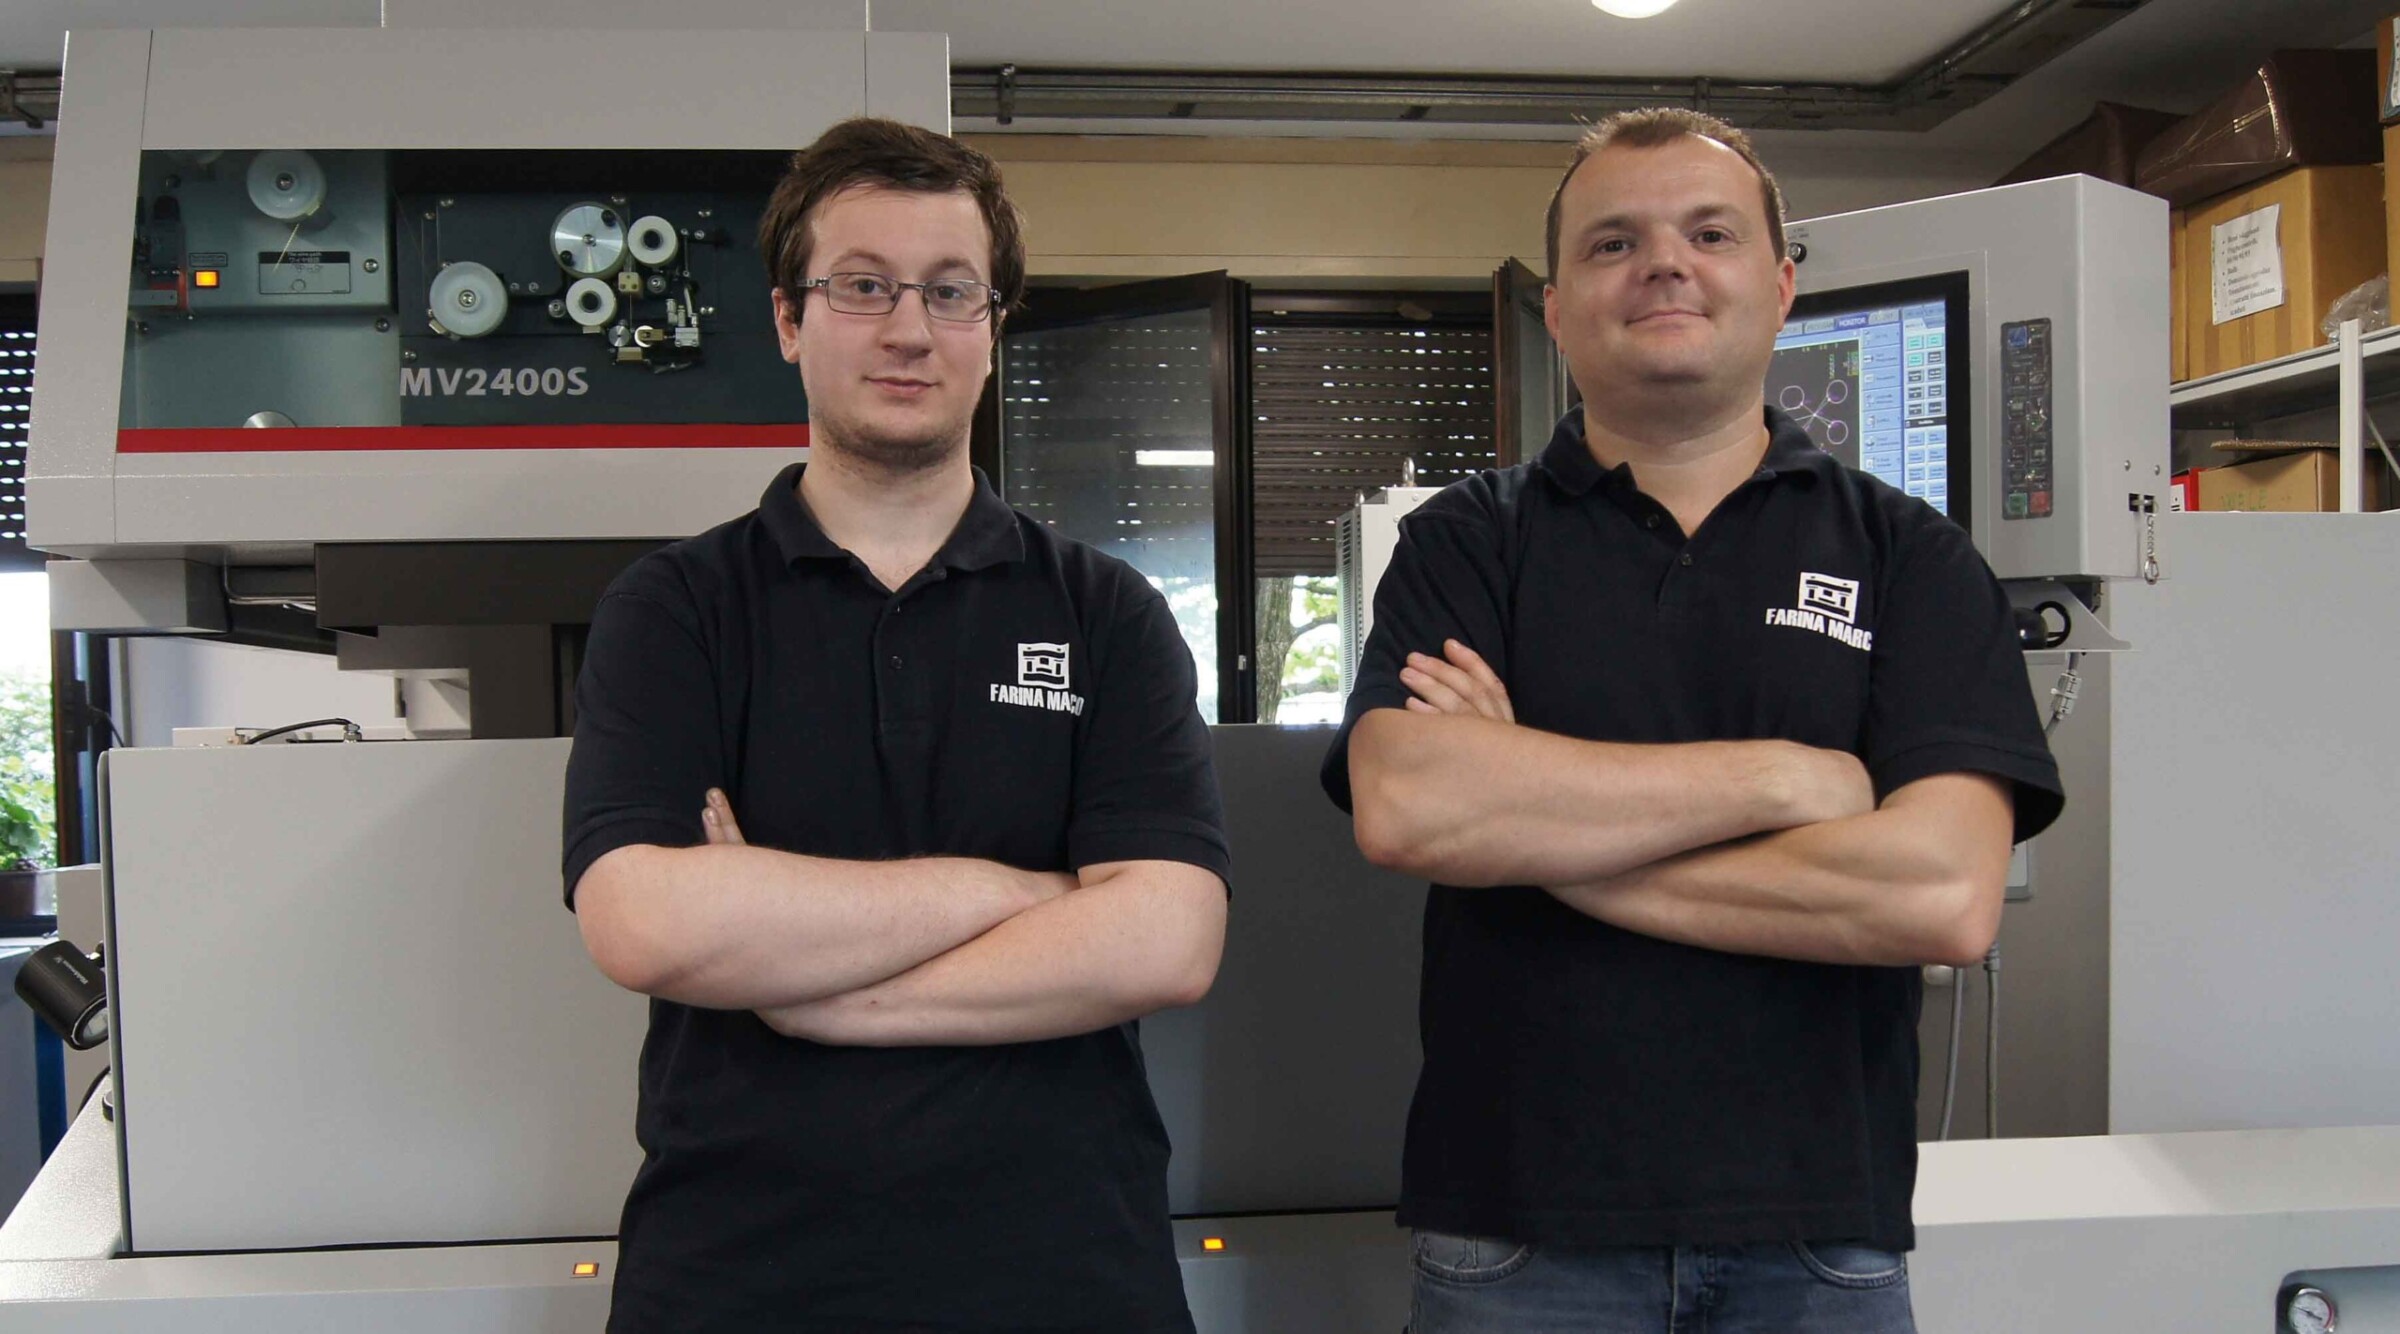 Cristian Farina, Sales Manager of the business in Cantù, (right) and Luca Somaschini (left)